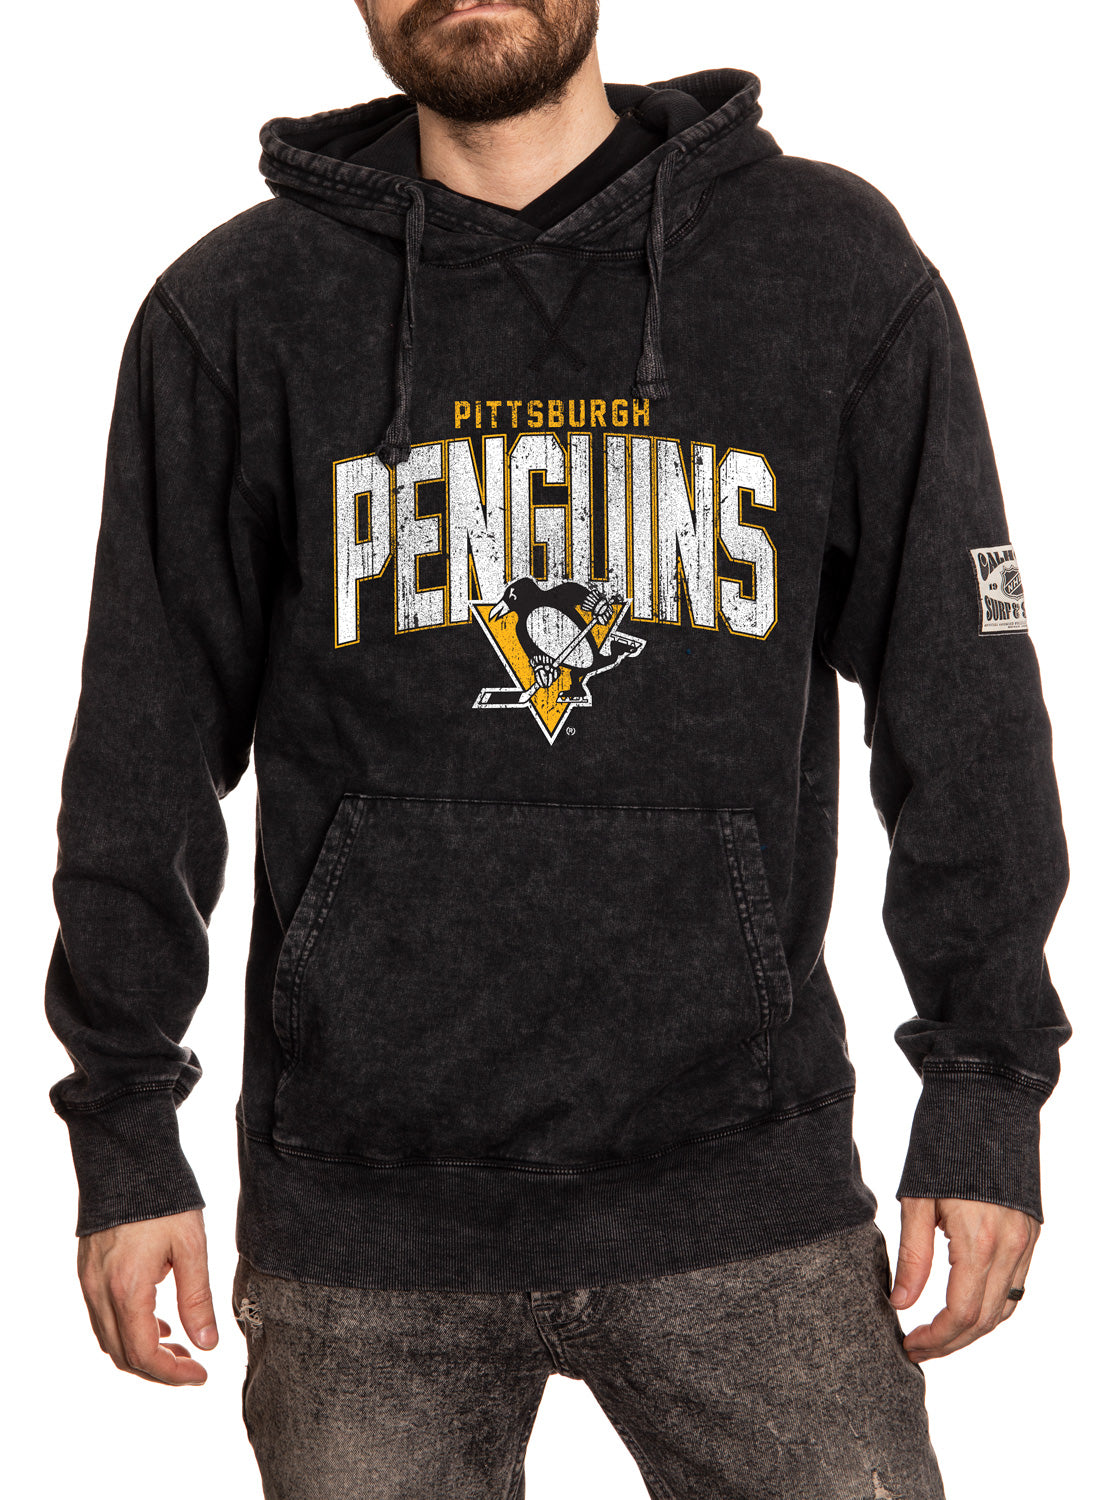 Pittsurgh Penguins Acid Wash Hoodie in Black Front View